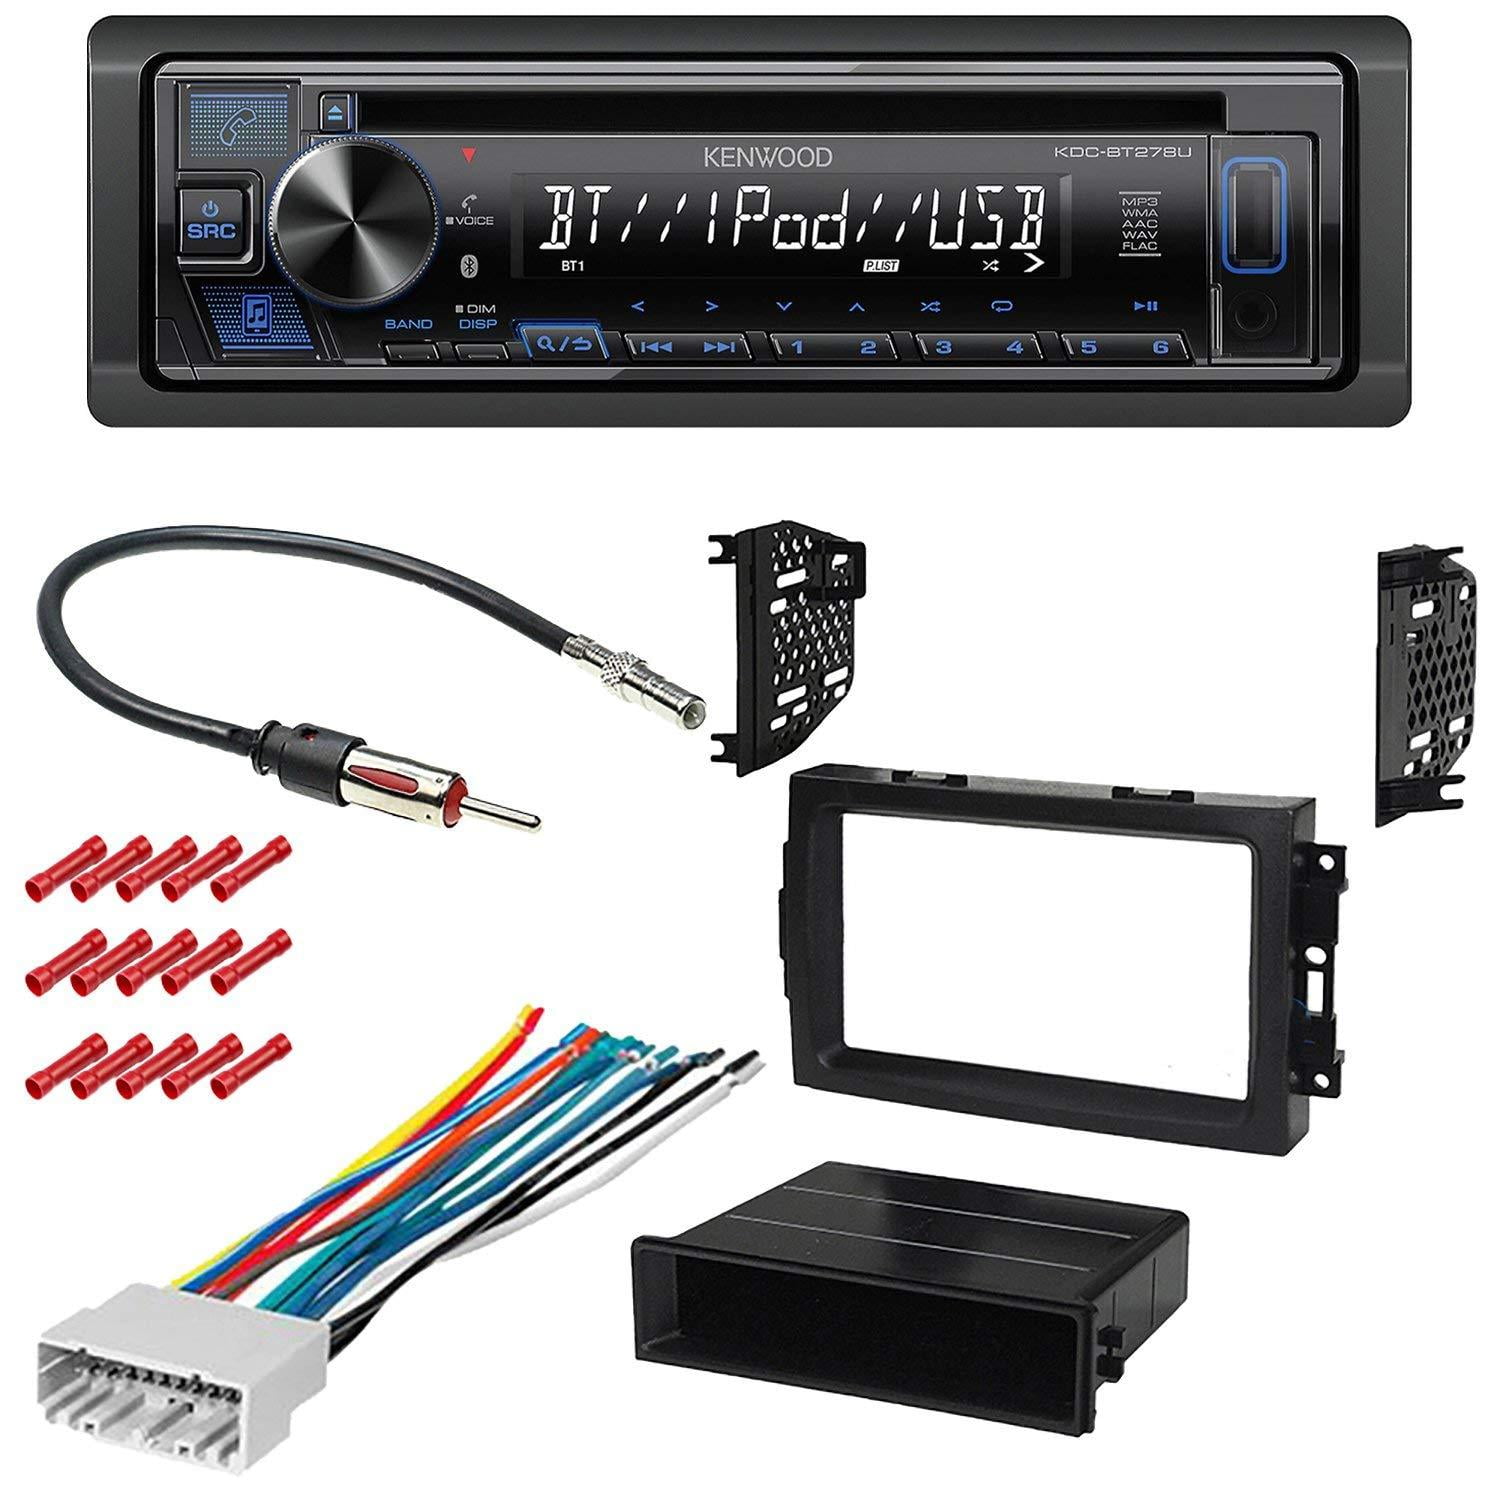 KIT8117 Kenwood Car Stereo with Bluetooth for 20052007